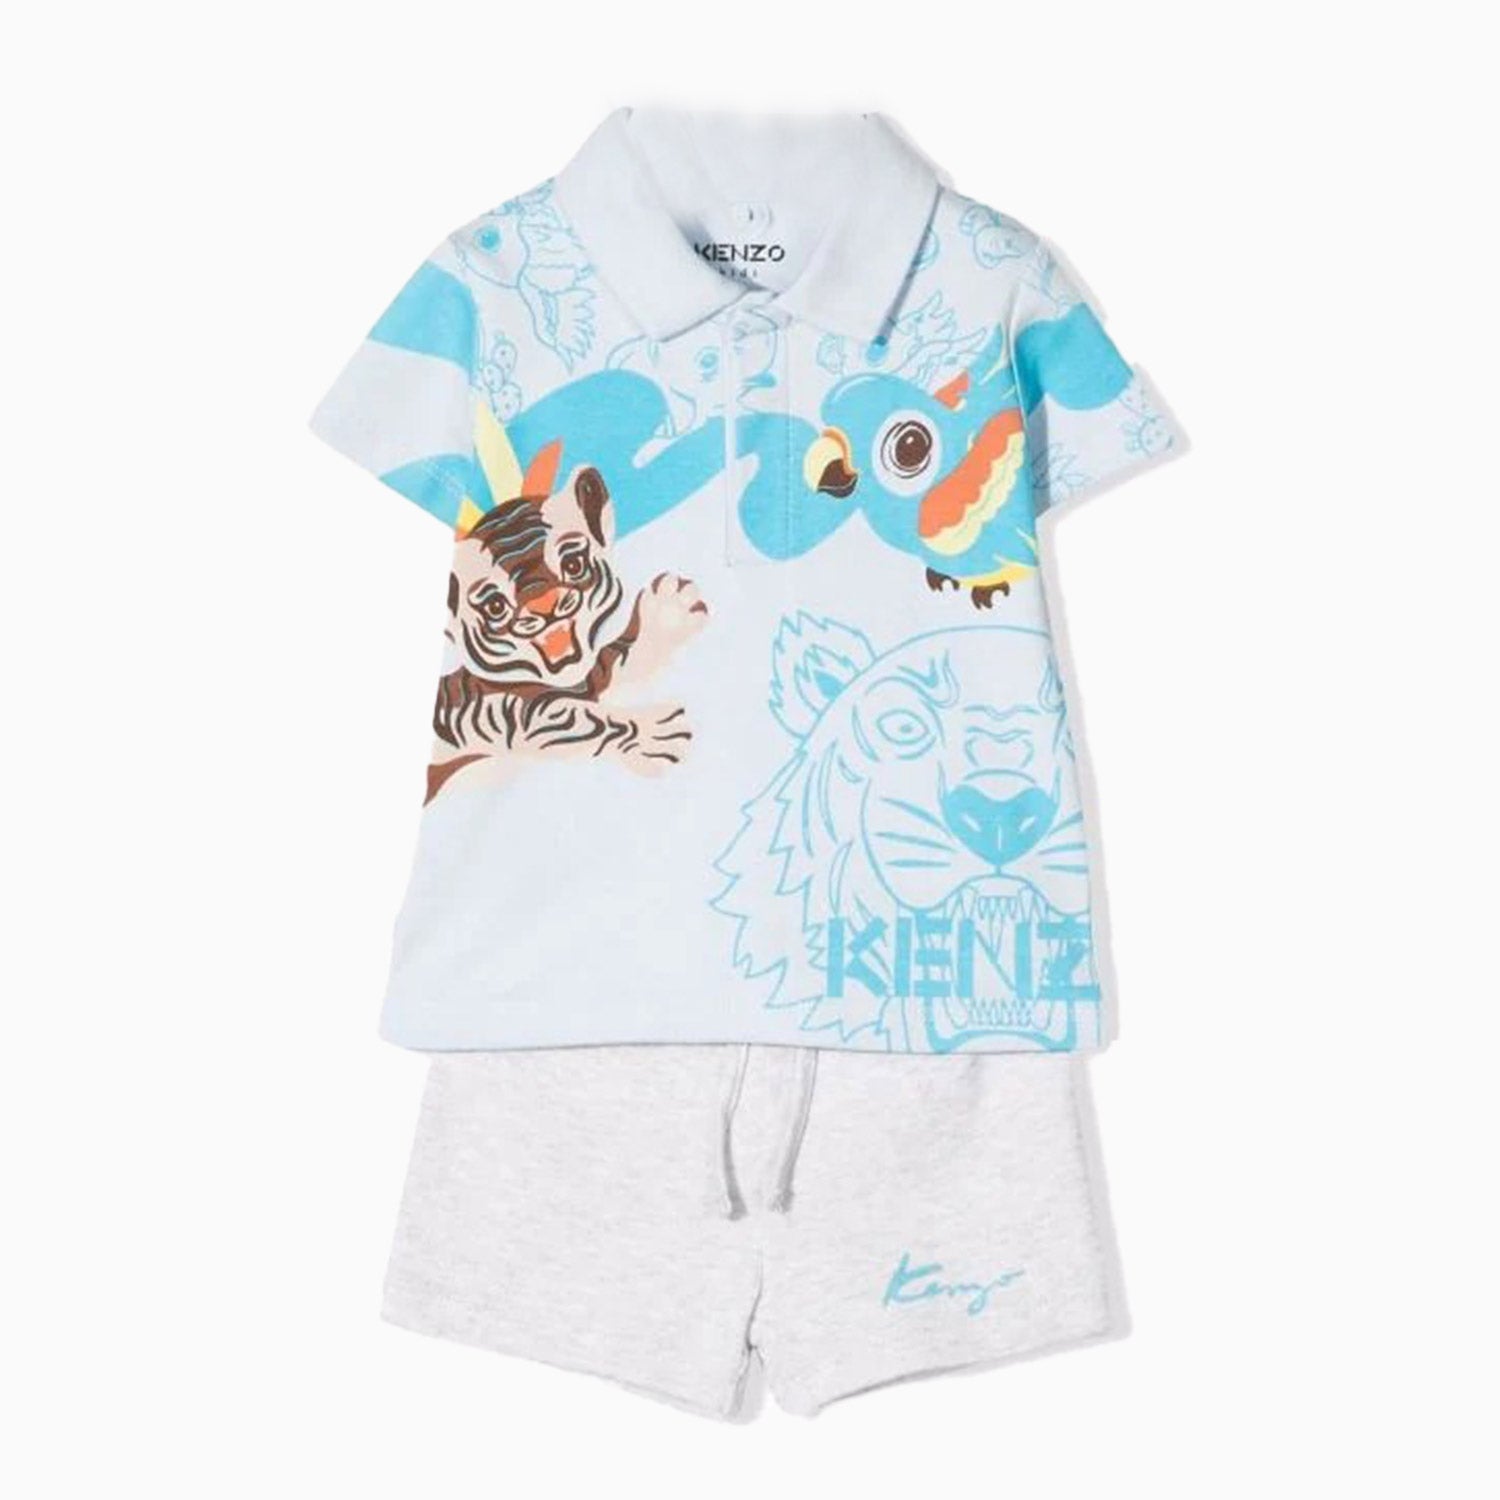 kenzo-kids-polo-shirt-and-short-outfit-k98056-78b